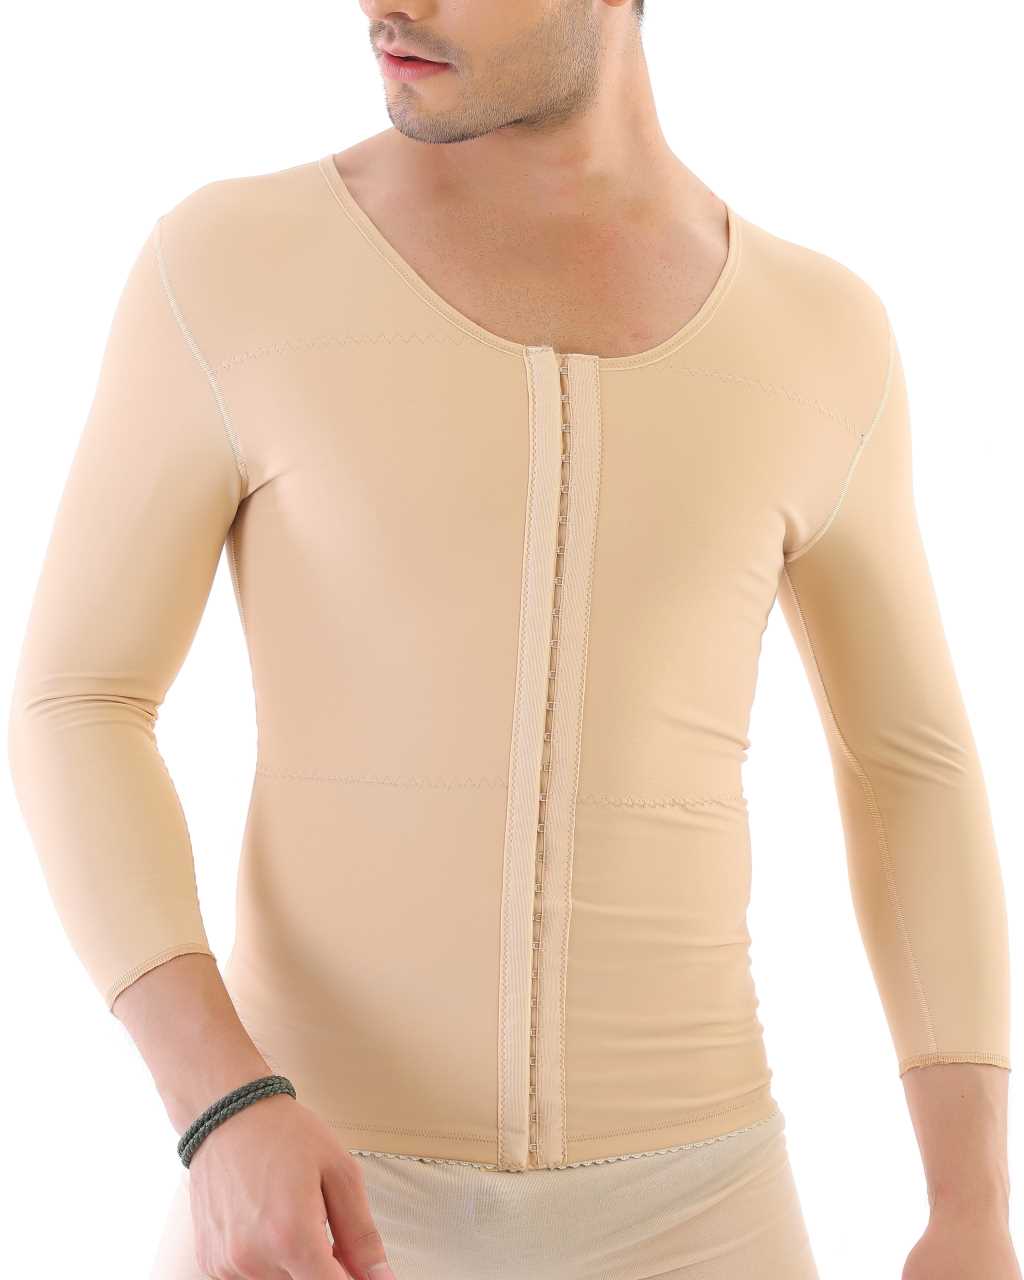 POST-SURGICAL COMPRESSION VEST (WITH SLEEVES)